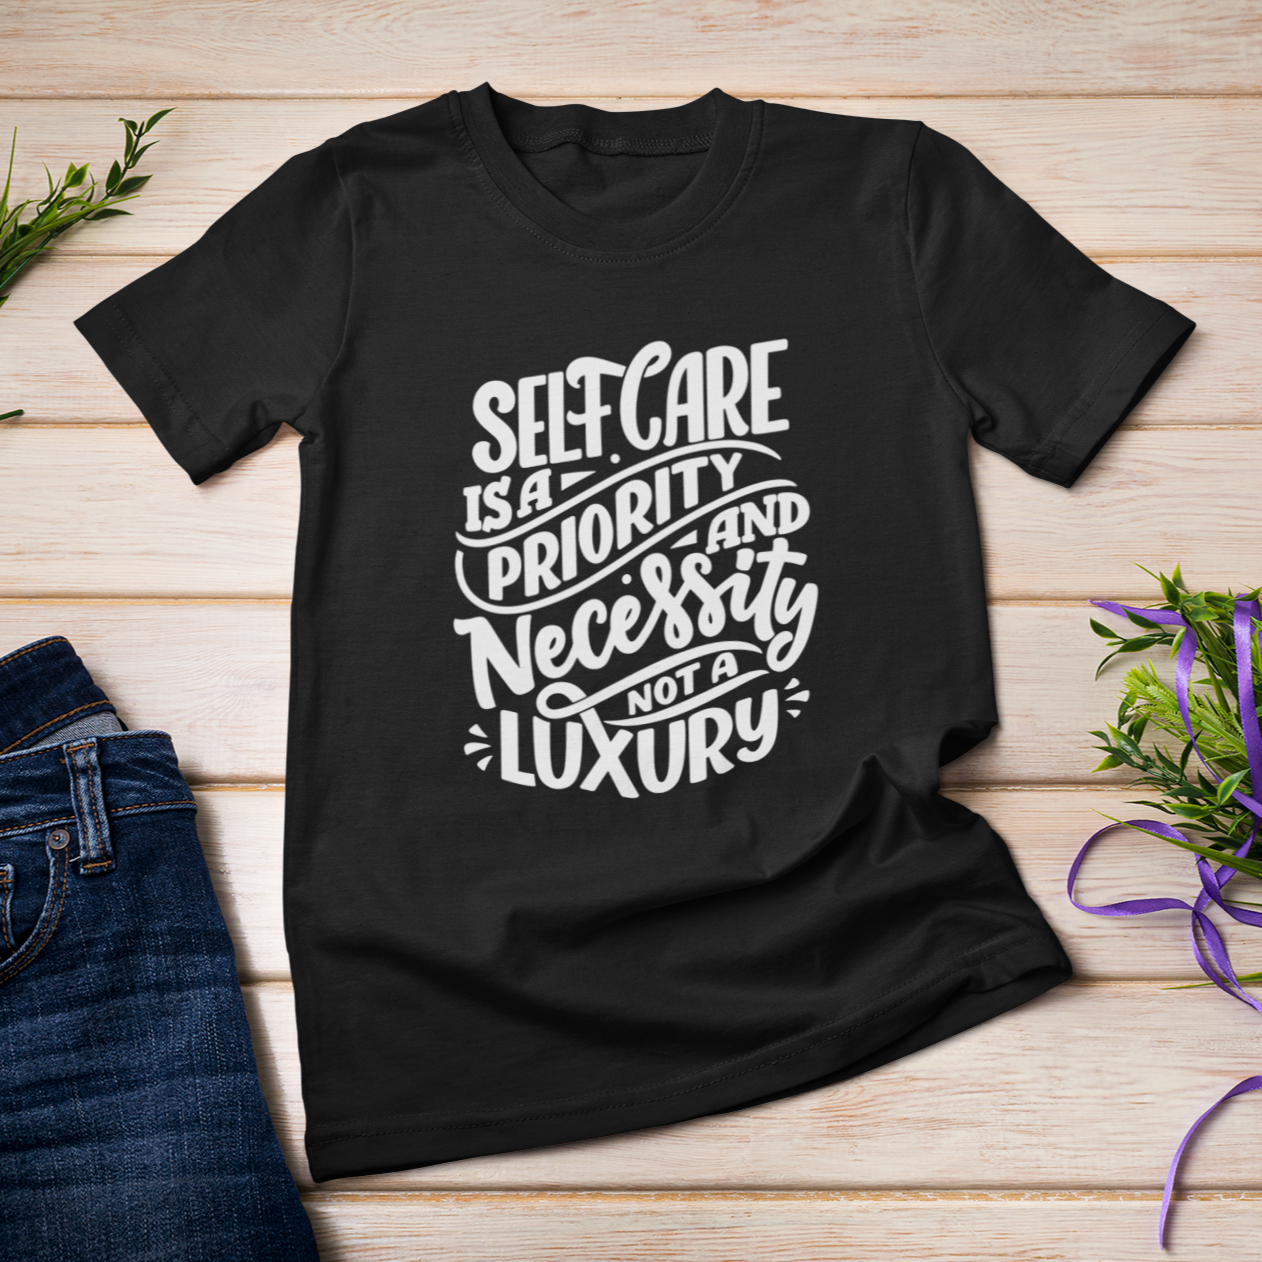 Story of Awakening Lifestyle Community Spirituality Relationships Love Light Meditation Oneness Earth Balance Healing Shop Store Charity Tree Nature Read Write T shirt Tops Tees Clothing Women Horoscope Organic Cotton Self Care Is A Priority Quote